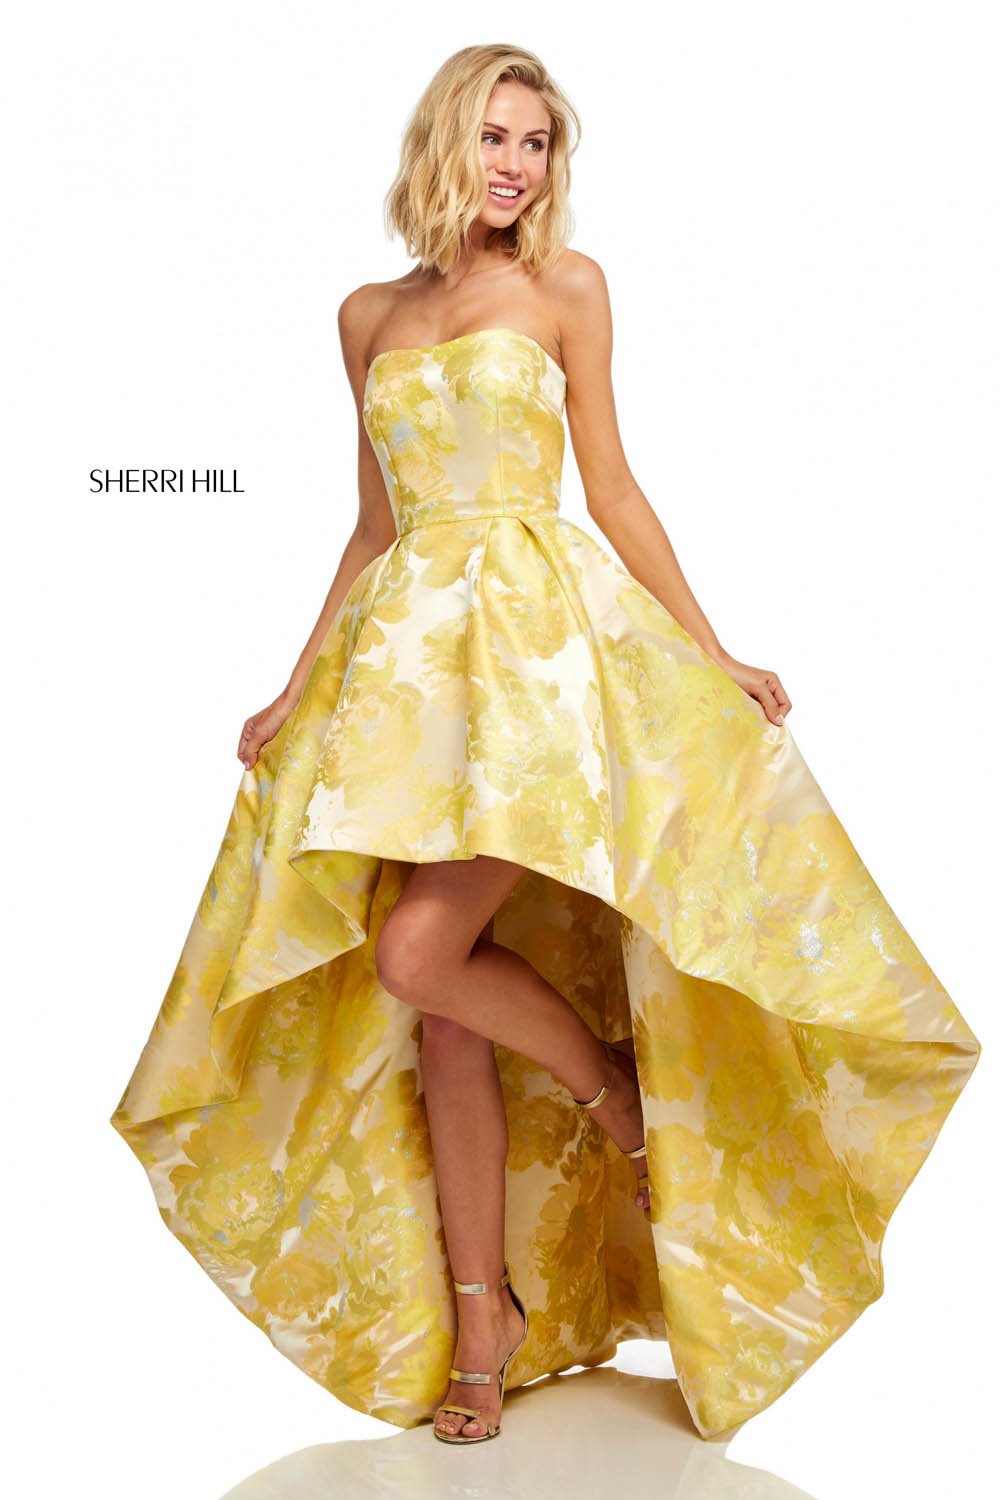 Sherri Hill 52416 dress images in these colors: Yellow Print.